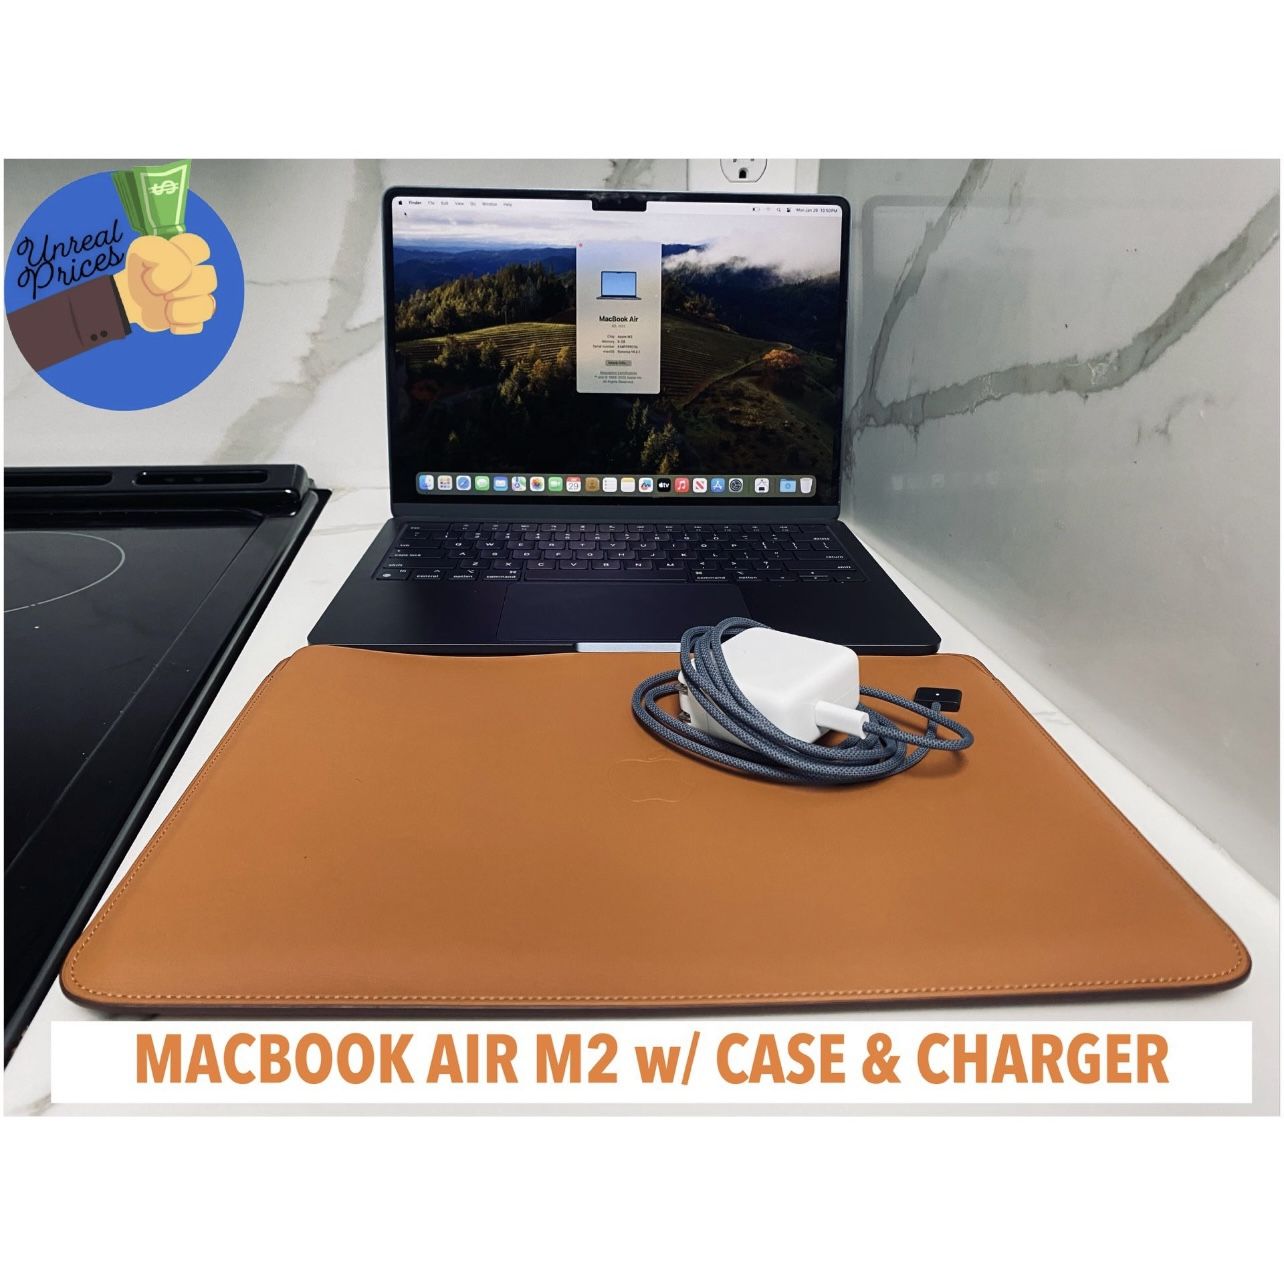 Apple MacBook Air M2 13 Inch Laptop w/ Leather Case, 100% Battery & Charger 💻 